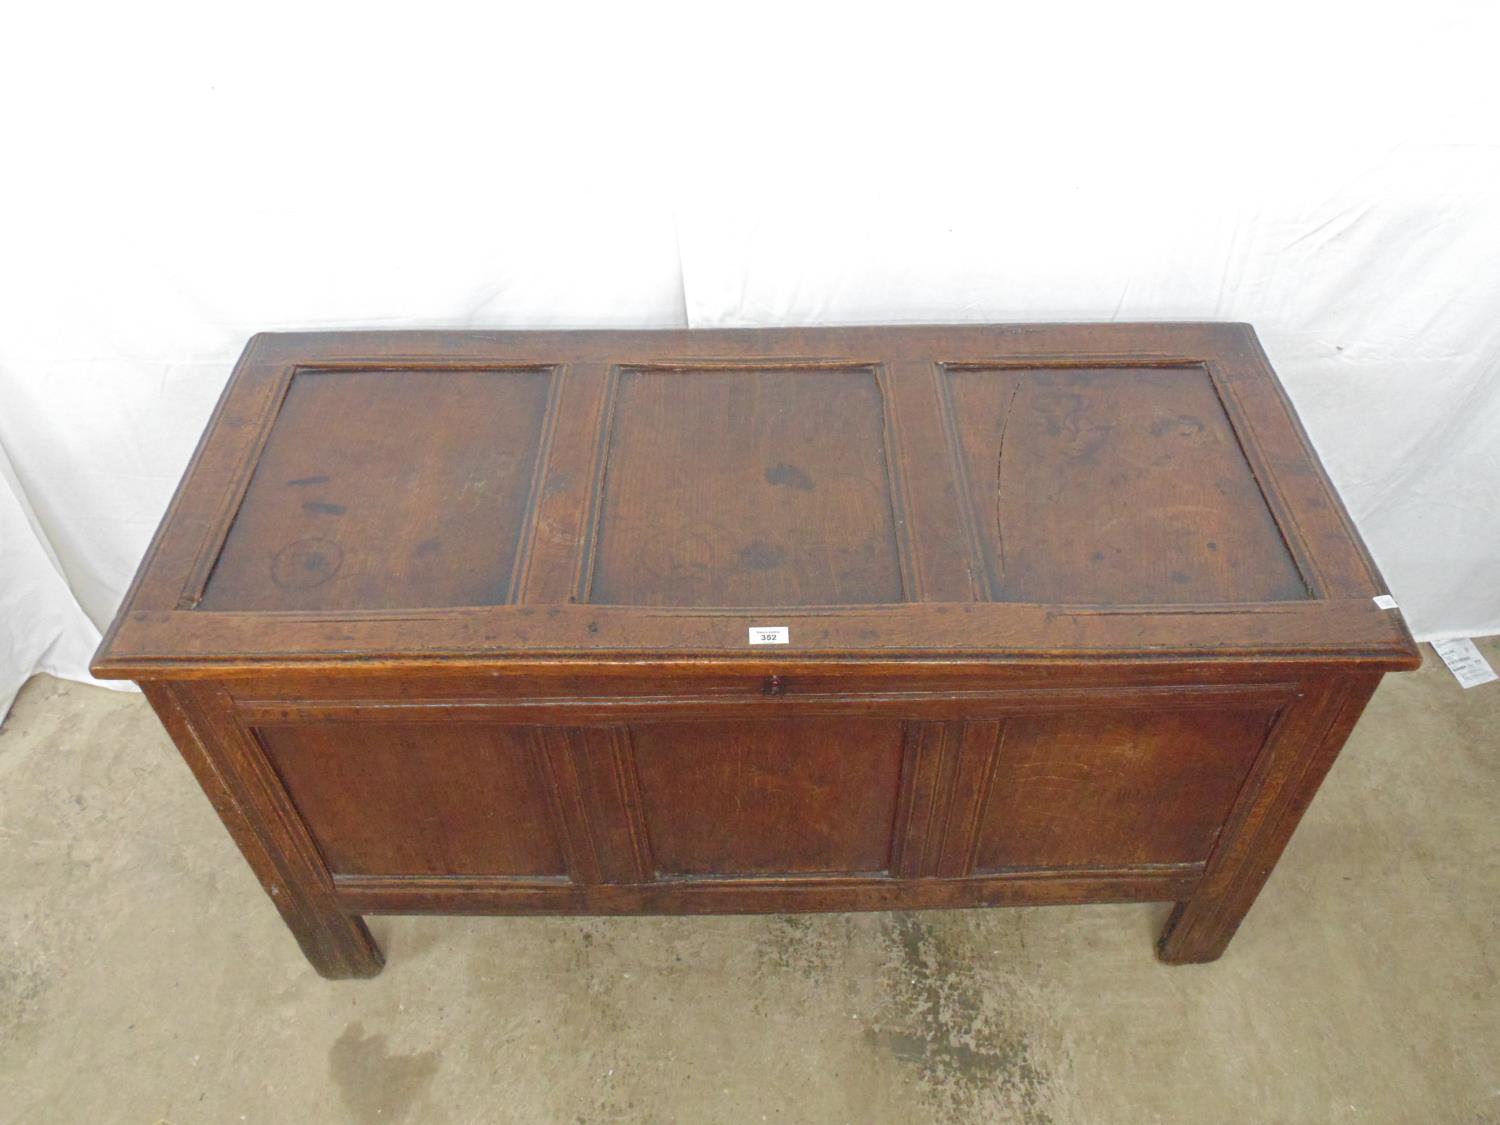 19th century oak coffer having three panel top and front, standing on square legs - 51.25" x 22.5" x - Image 2 of 3